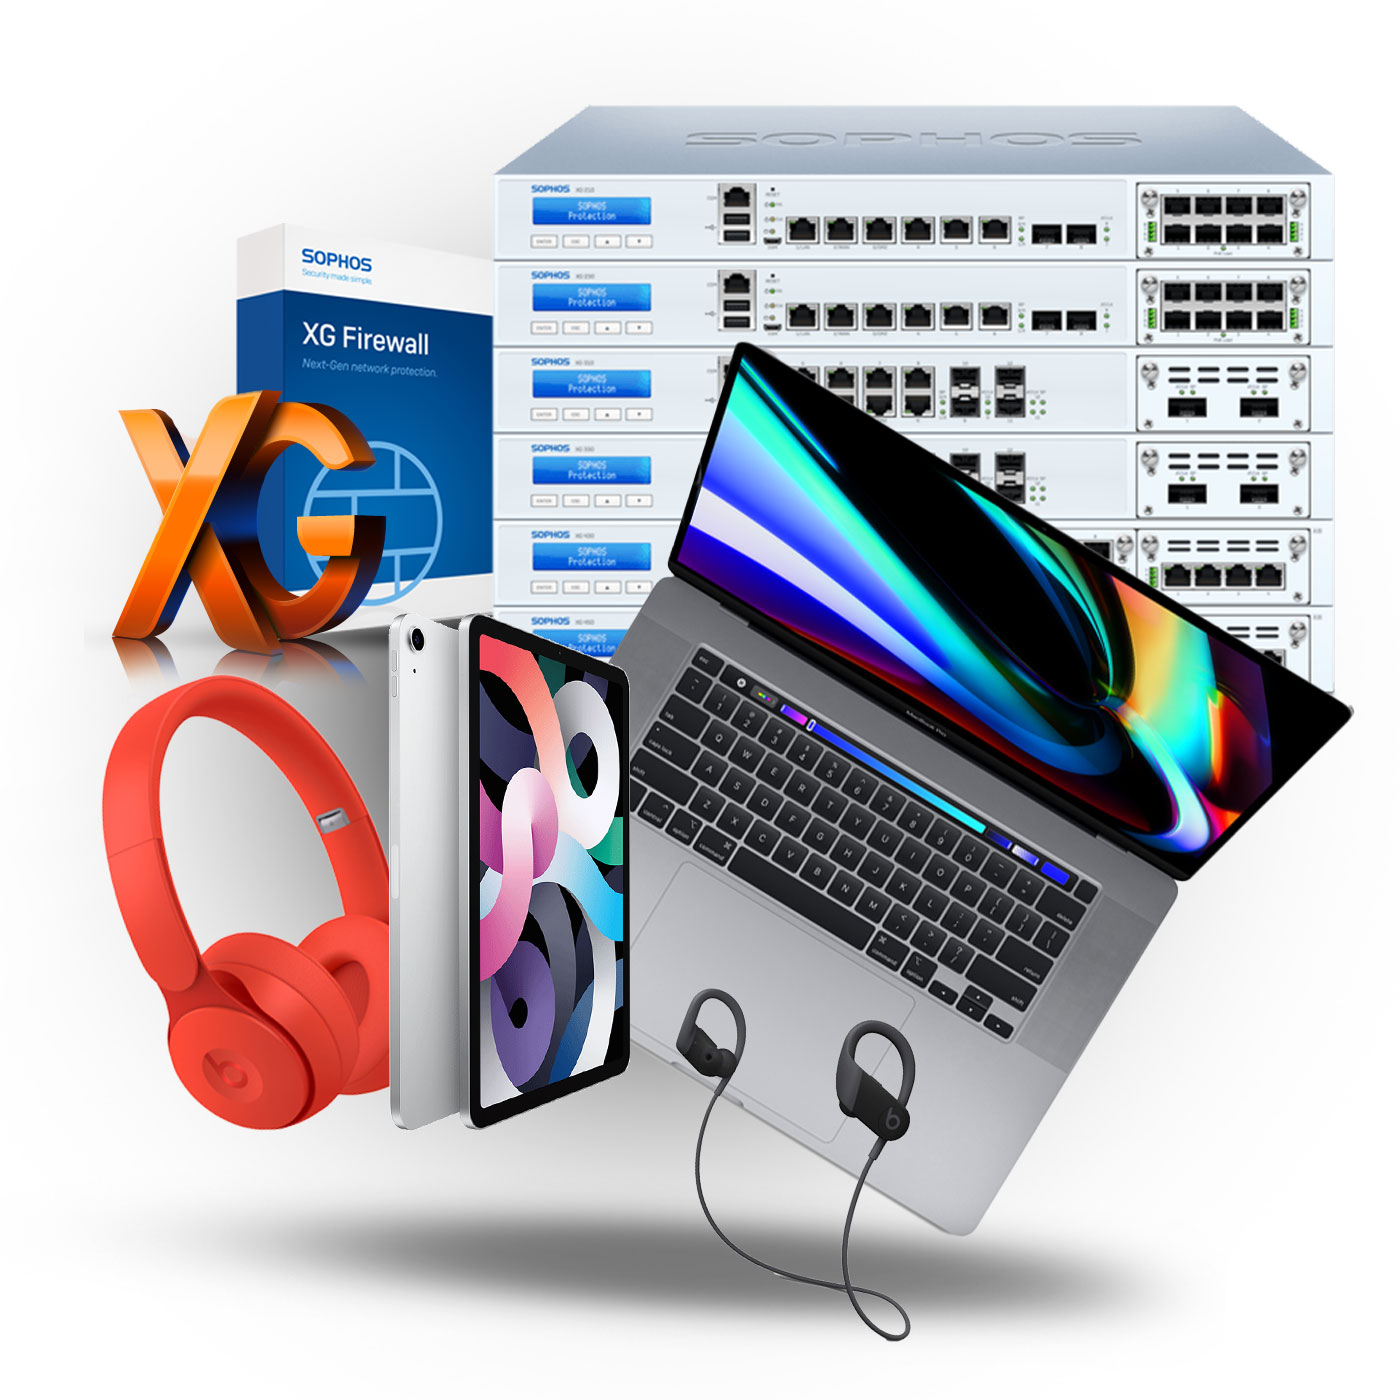 sophos xg home edition review